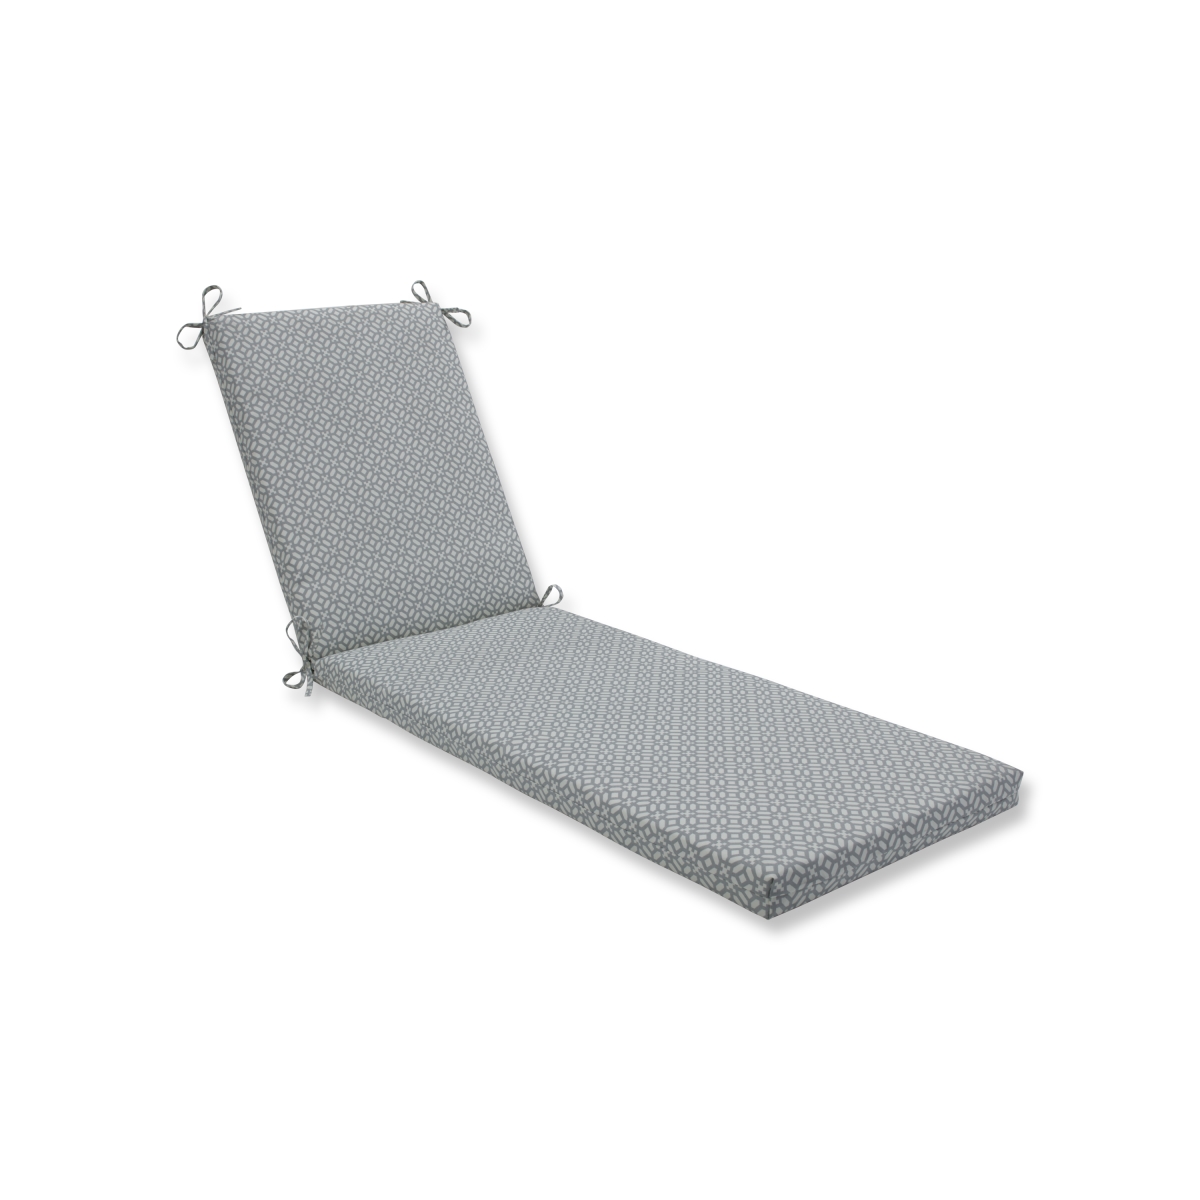 80 X 23 X 3 In. Outdoor & Indoor In The Frame Pebble Chaise Lounge Cushion, Grey